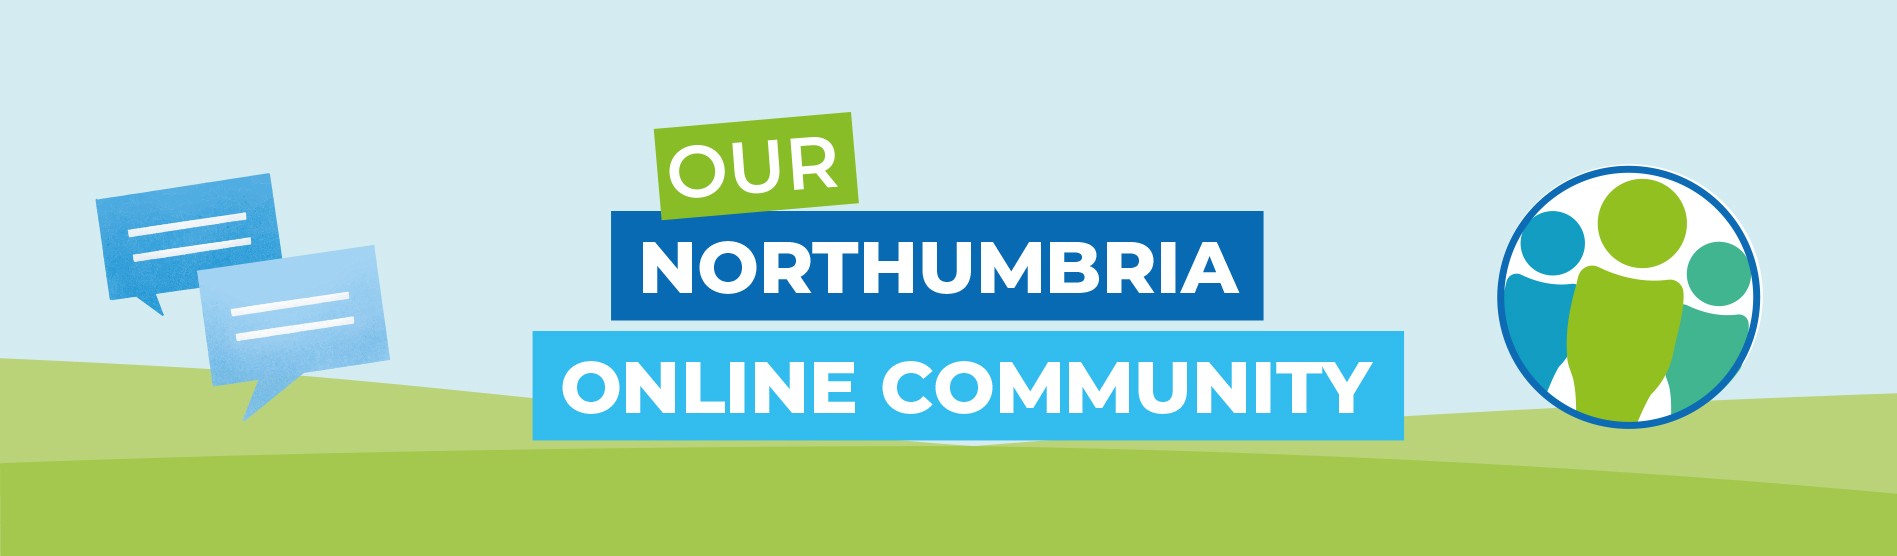 Graphic that says 'Our Northumbria Online Community'